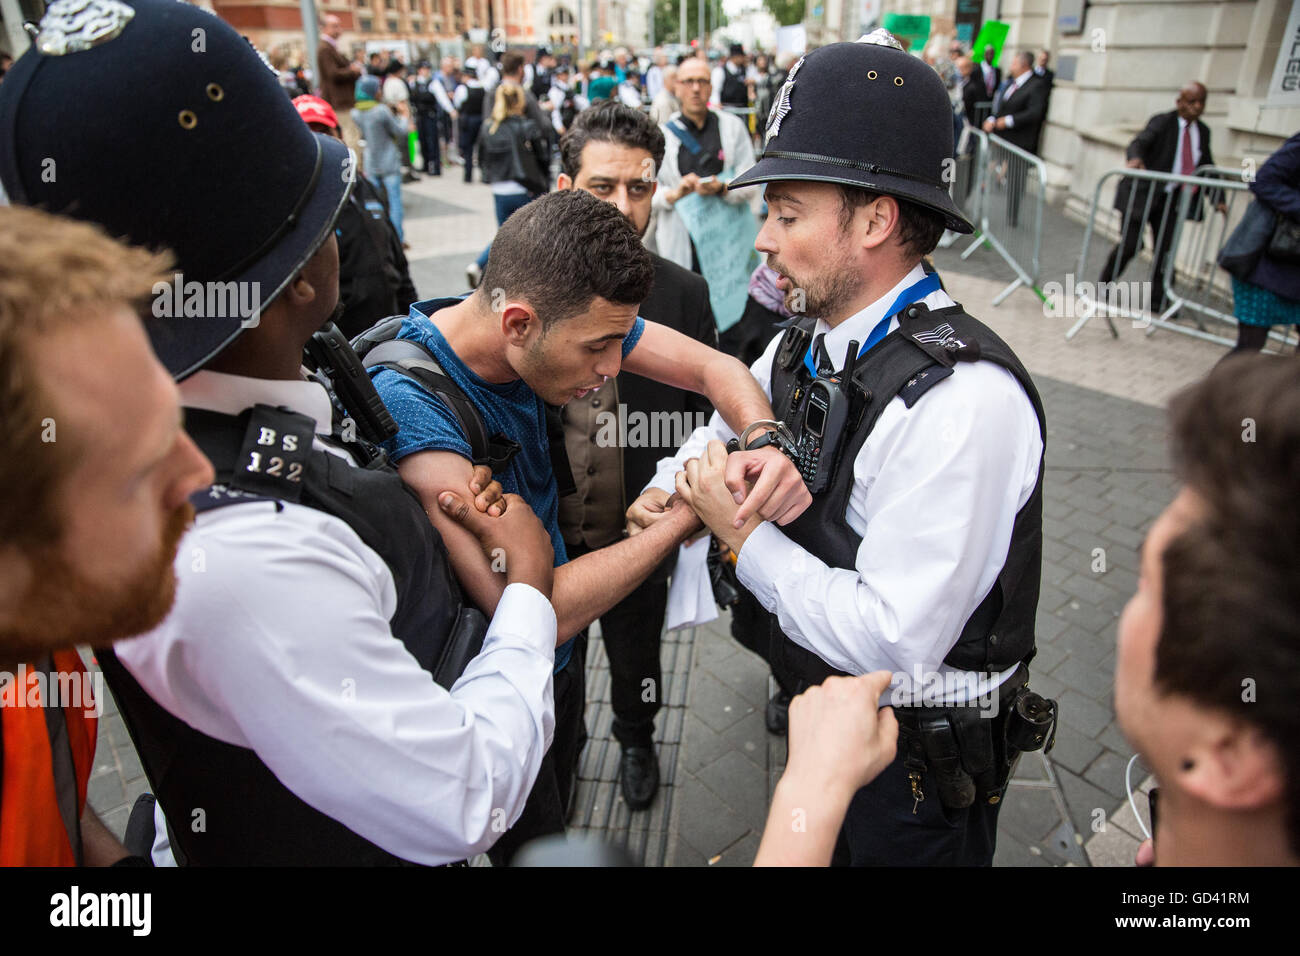 London, UK. 11th July, 2016. Bahraini human rights campaigner Isa Alaali points out that handcuffs have been secured too tightly following arrest during a protest outside an official reception for the Farnborough International arms fair attended by arms dealers at the Science Museum. Some arms dealers attending the reception are believed to have been turned away as a result of the protest organised by the Campaign Against Arms Trade. Protesters were objecting in particular to arms sales to Saudi Arabia, used in human rights abuses against the Yemeni people. Credit:  Mark Kerrison/Alamy Live Ne Stock Photo